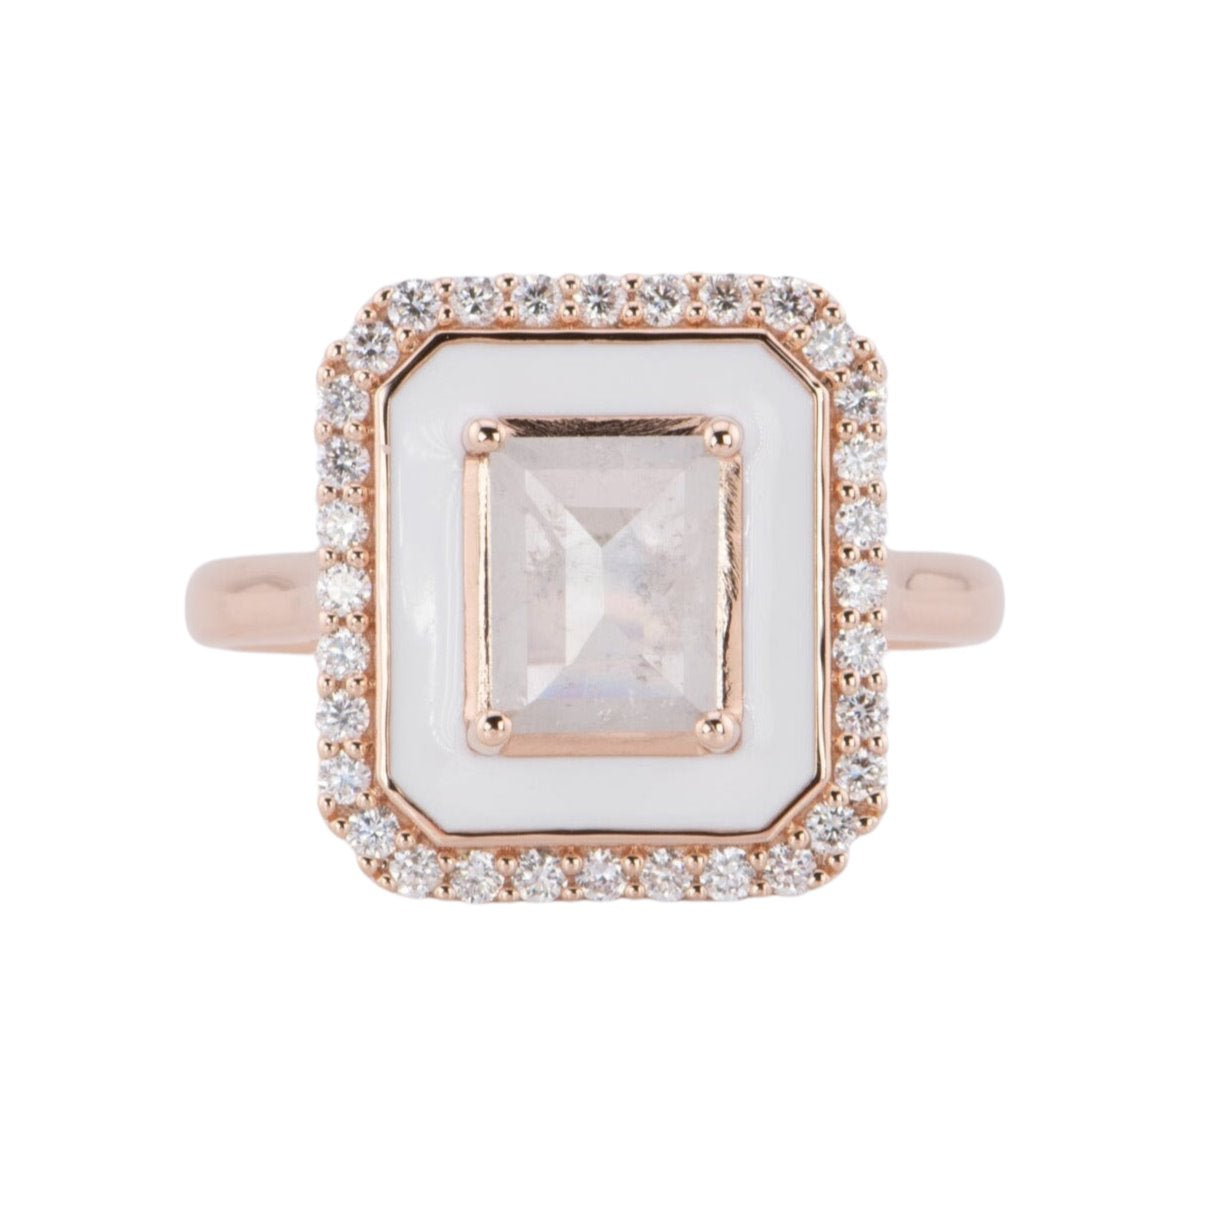 Icy Gray Diamond 1.01ct with White Enamel Halo and Outer Diamonds Engagement Ring 14K Rose Gold R6596 Aurora Designer